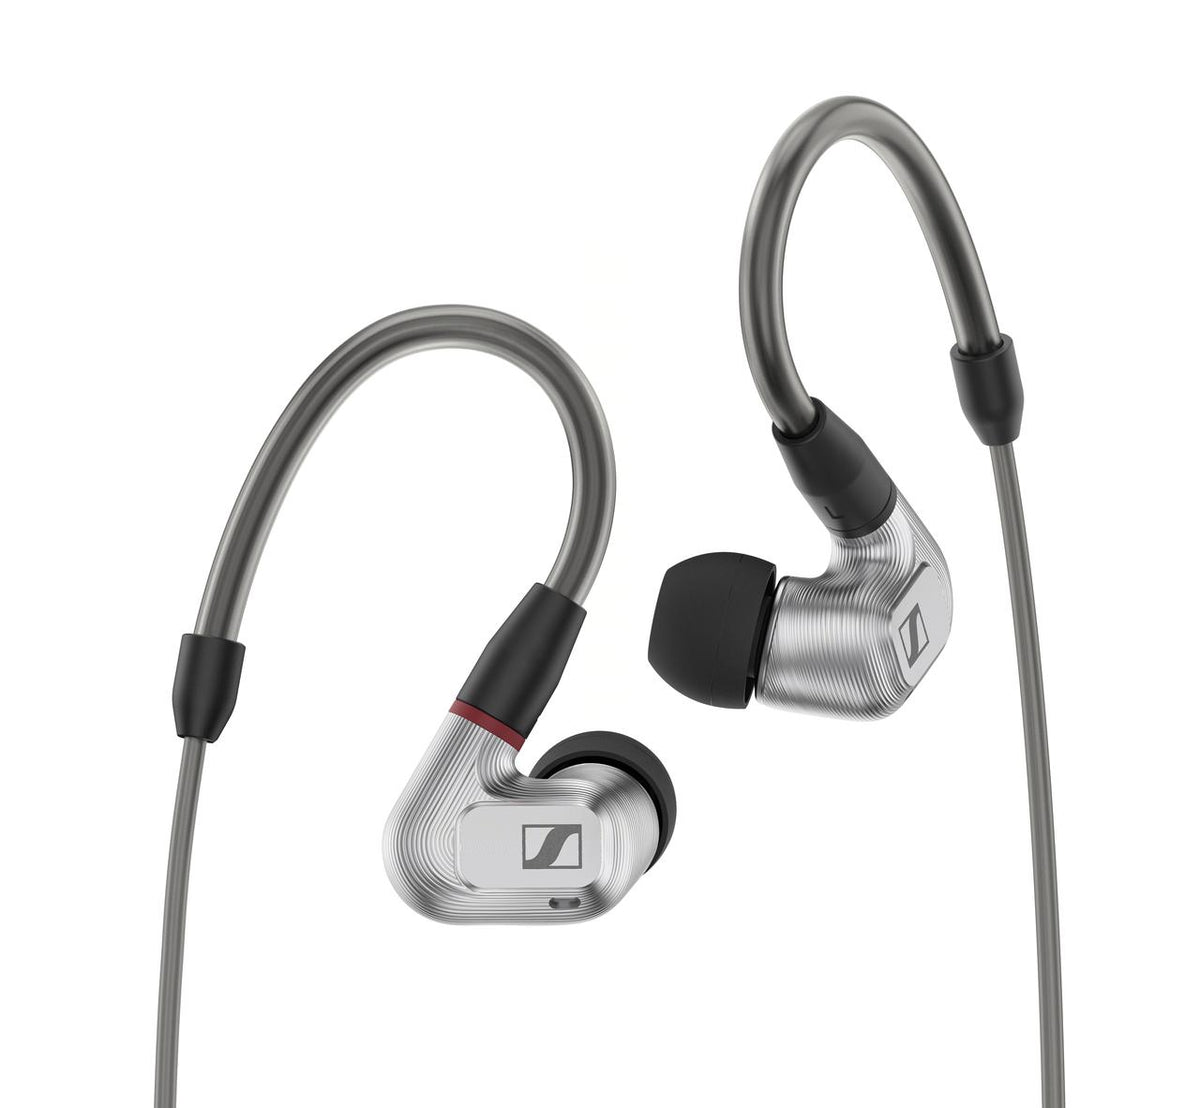 Wireless,　Sports　Sennheiser　Music;　In-Ear,　Noise-Canceling,　IE　Discover　Entertainment,　Travel,　900　Sound　Bluetooth,　True